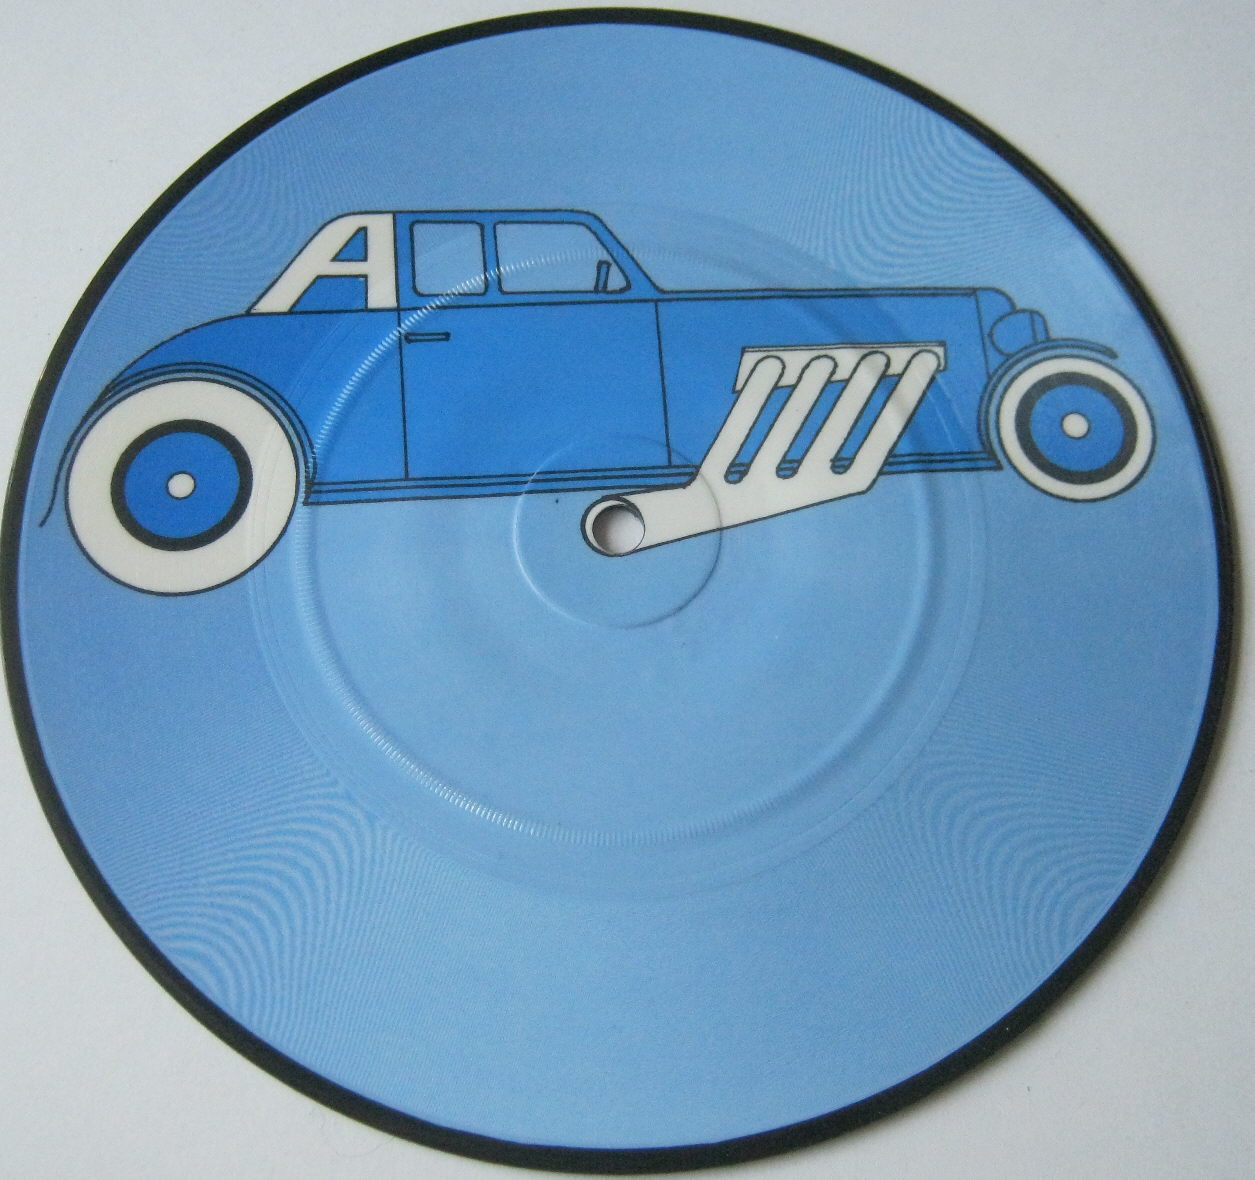 Totally Vinyl Records Cars, The Just what I needed 7 inch Picture Disc Vinyl